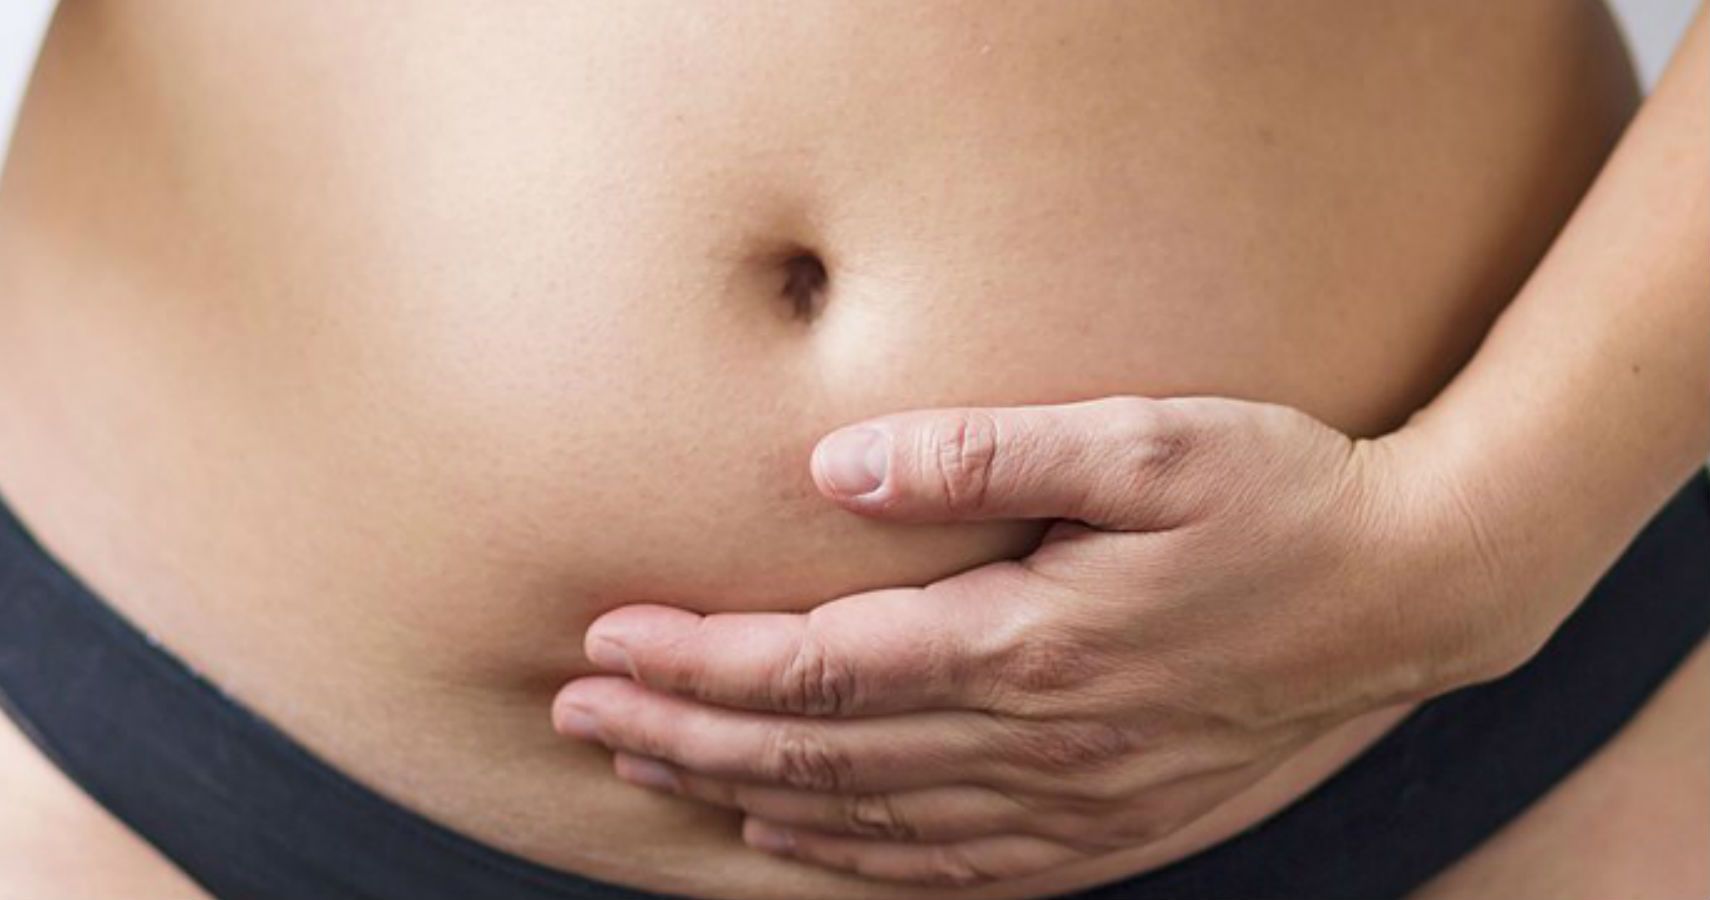 What To Expect From Your First Period After Birth